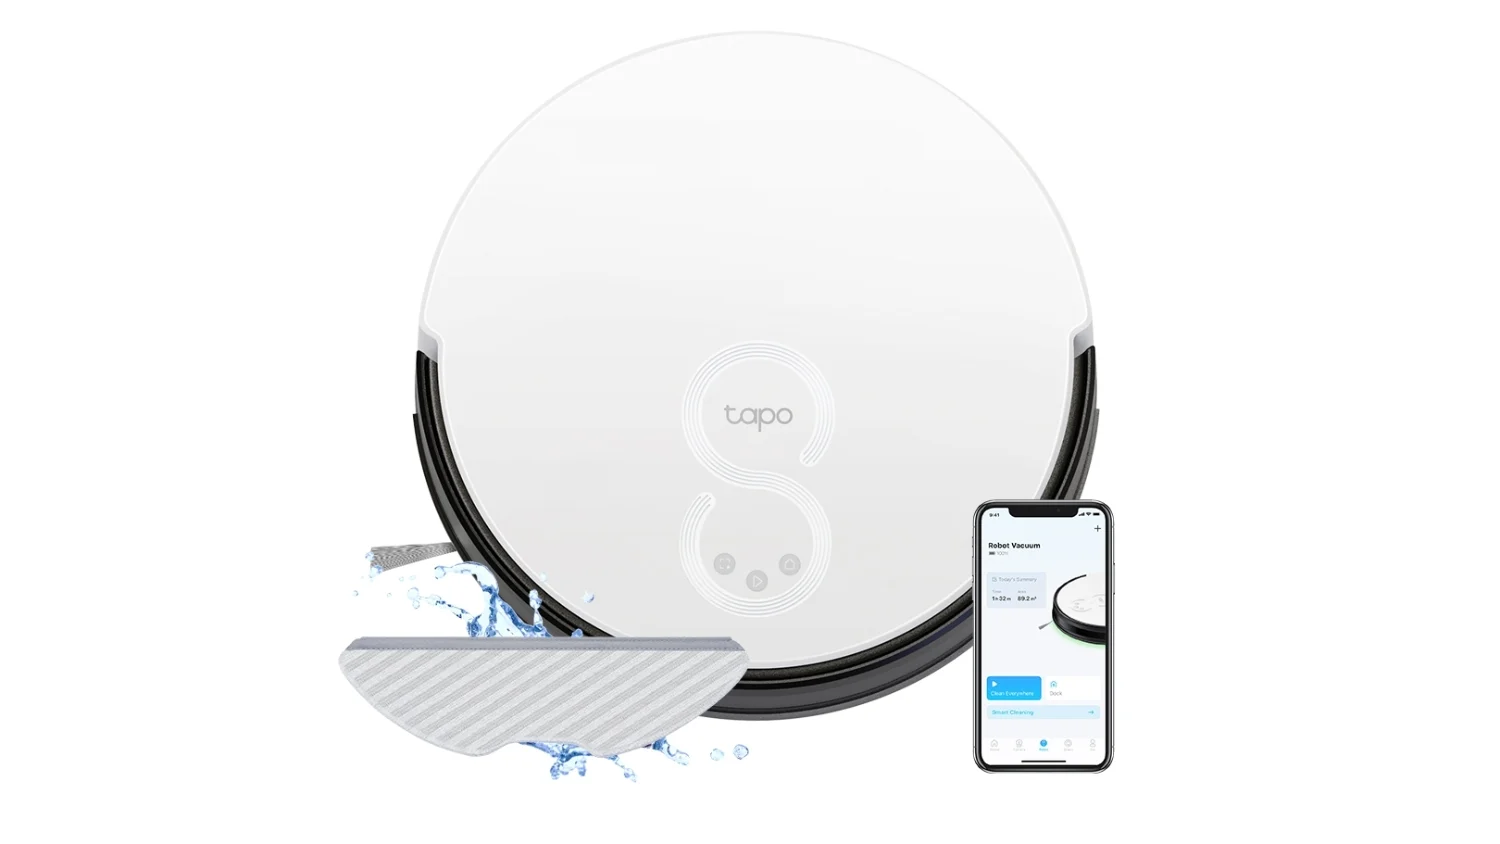 Marketing image (on white background) of a TP-Link robot vacuum / mop. The vacuum is at center with splashing water on the left and the smartphone app on the right.